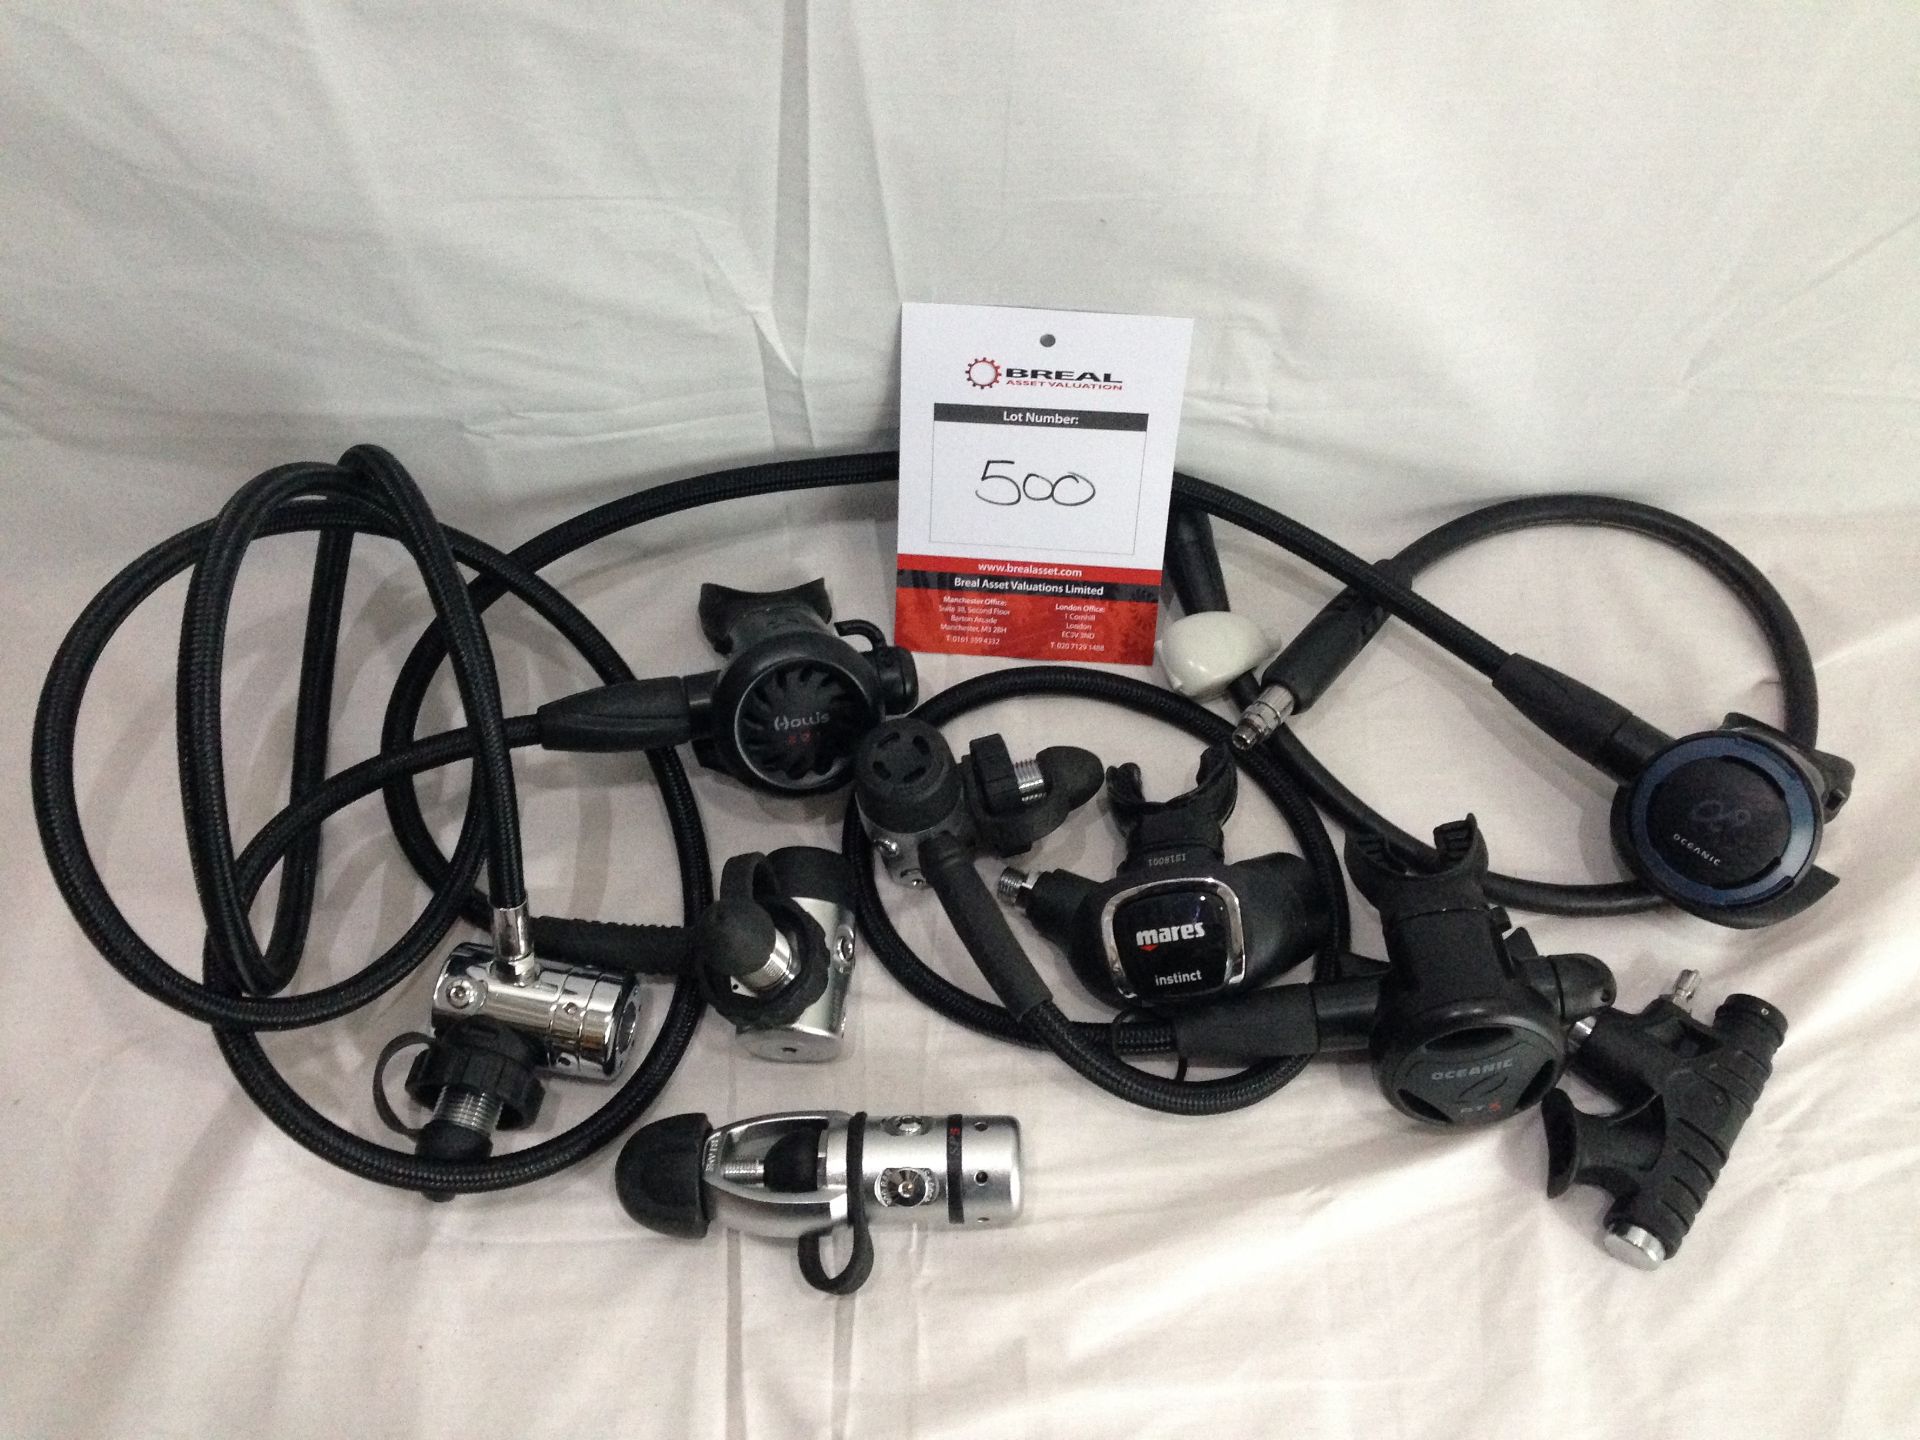 4 x Various Regulator Mouthpeices and Attachments (Mares, Oceanic & Hollis)